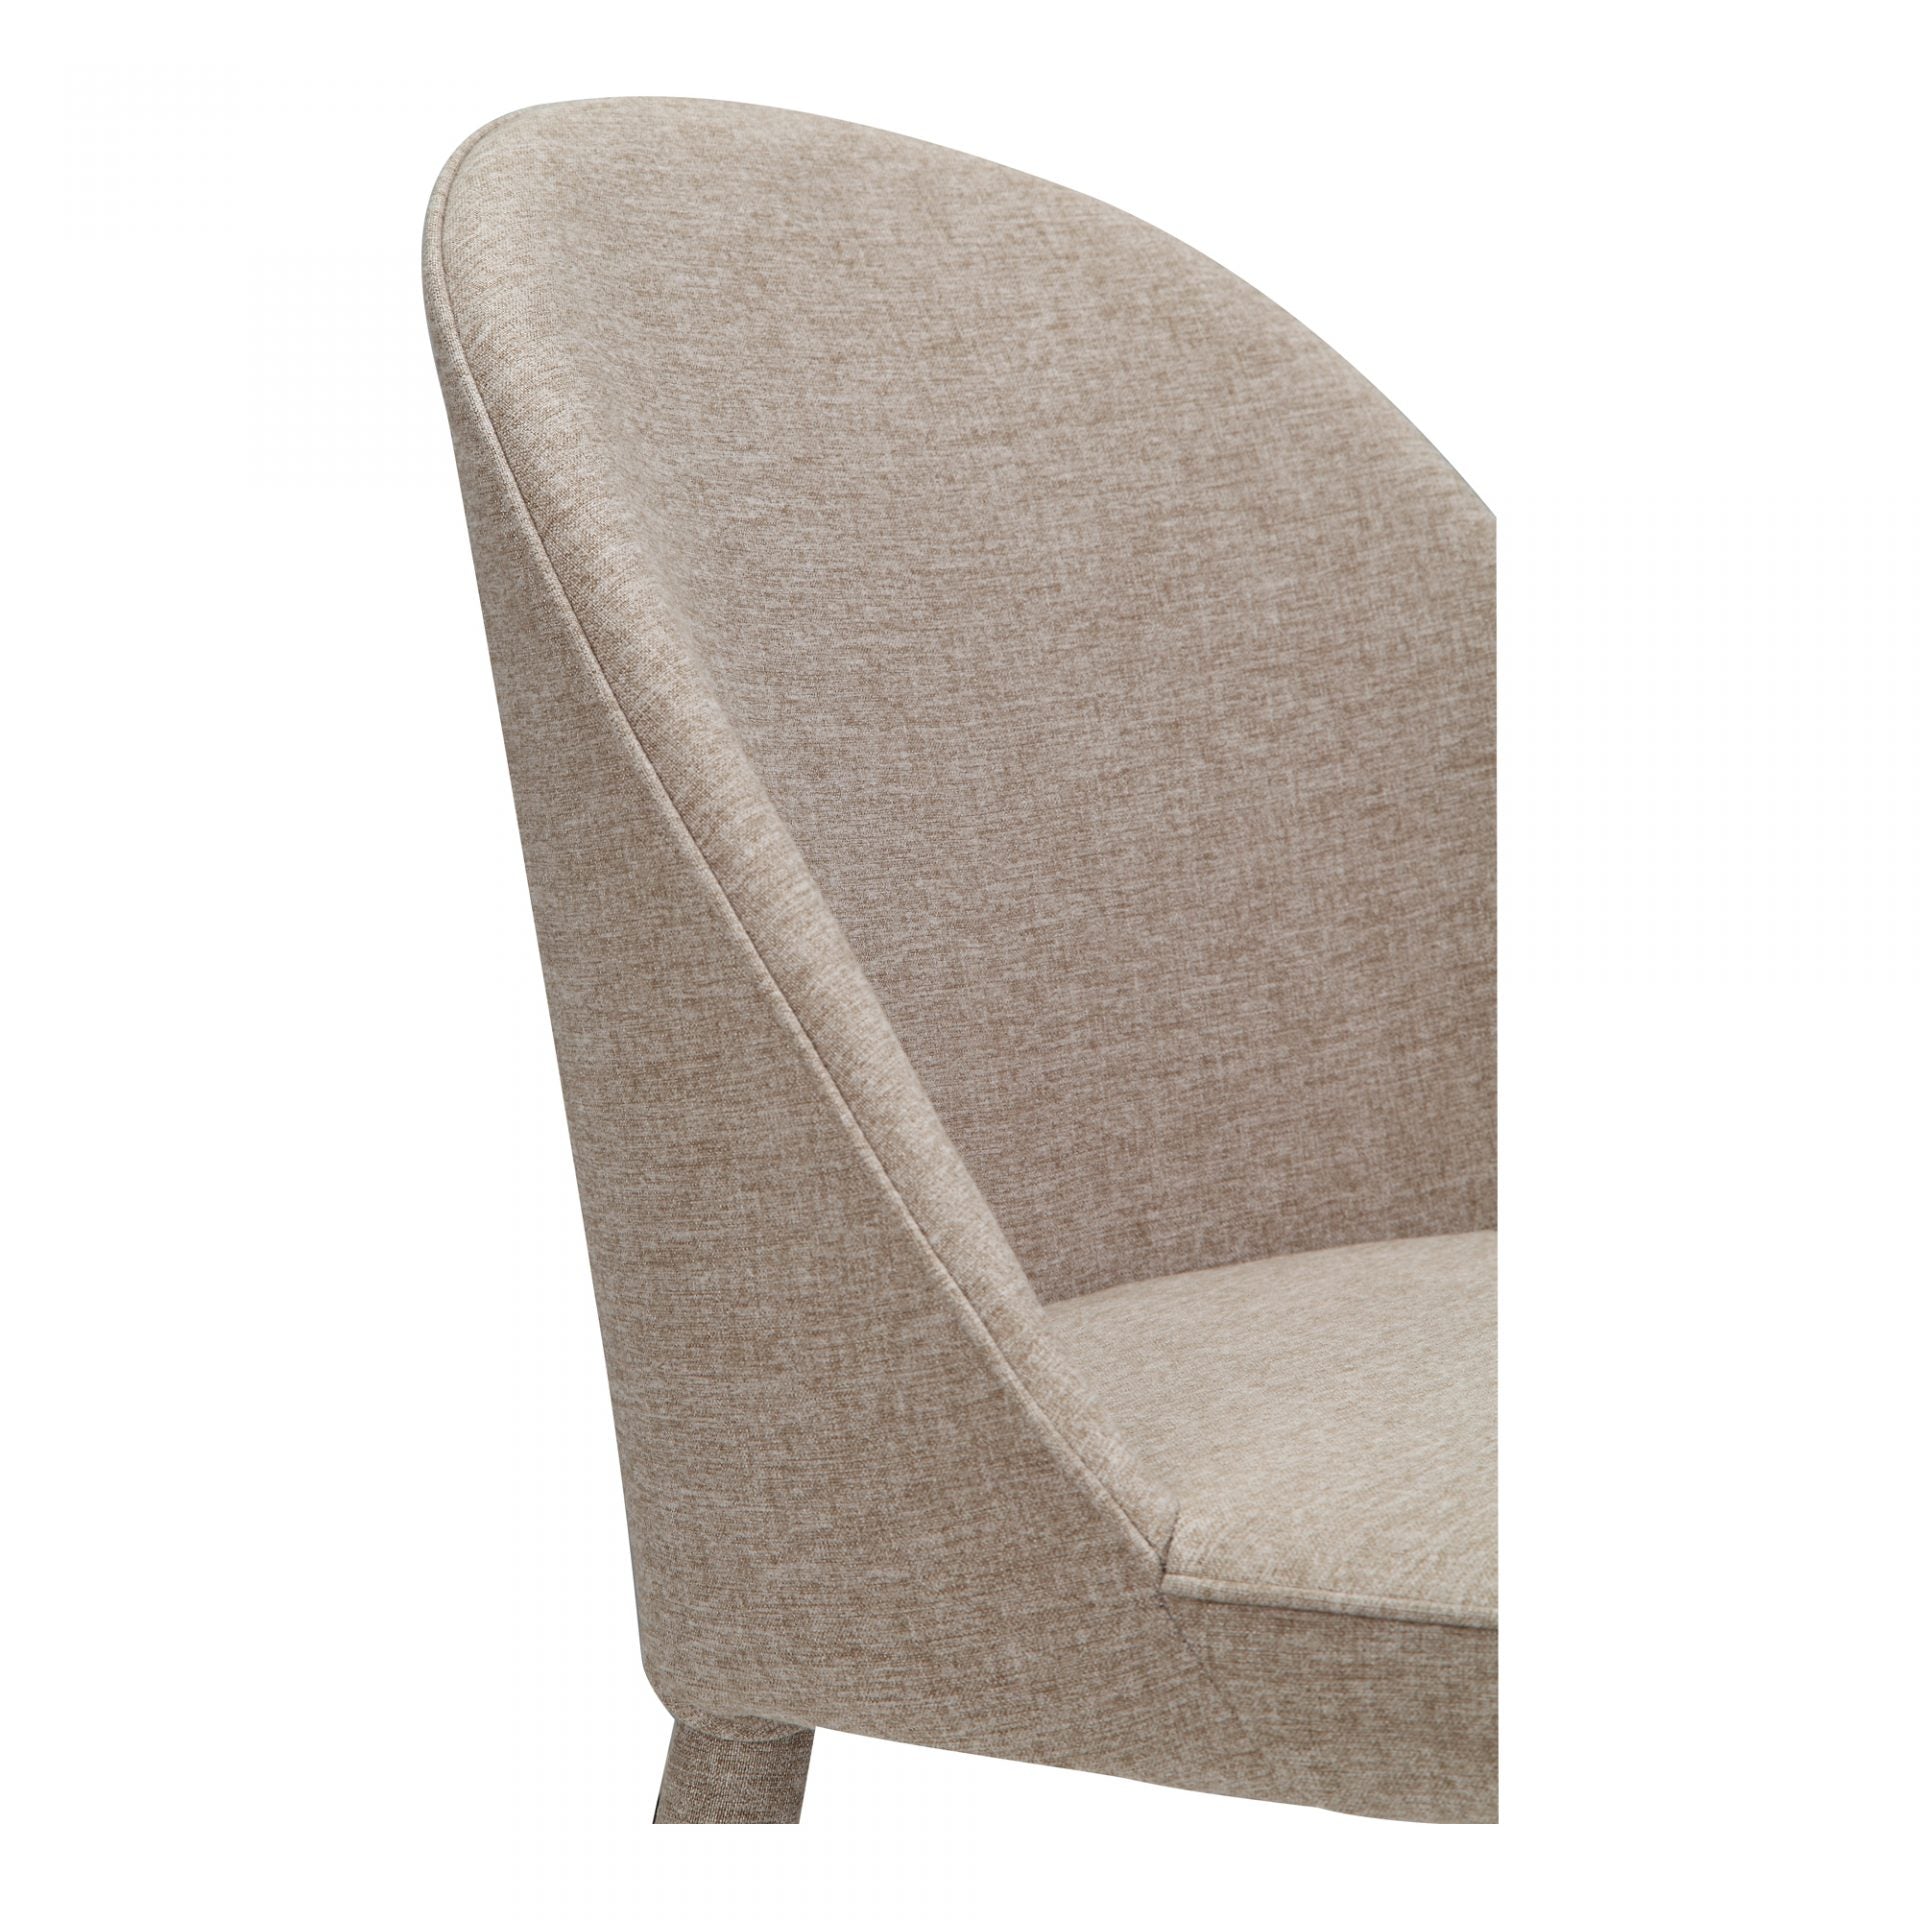 The slim legs of this Burton Light Grey Fabric Dining Chair give it a contemporary modern design. The foam cushion makes this an extremely comfortable and attractive dining chair.   Size: 19"W x 22"D x 33"H Seat Height: 18" Materials: Upholstery 100% Polyester, Iron Frame, Plywood, Foam